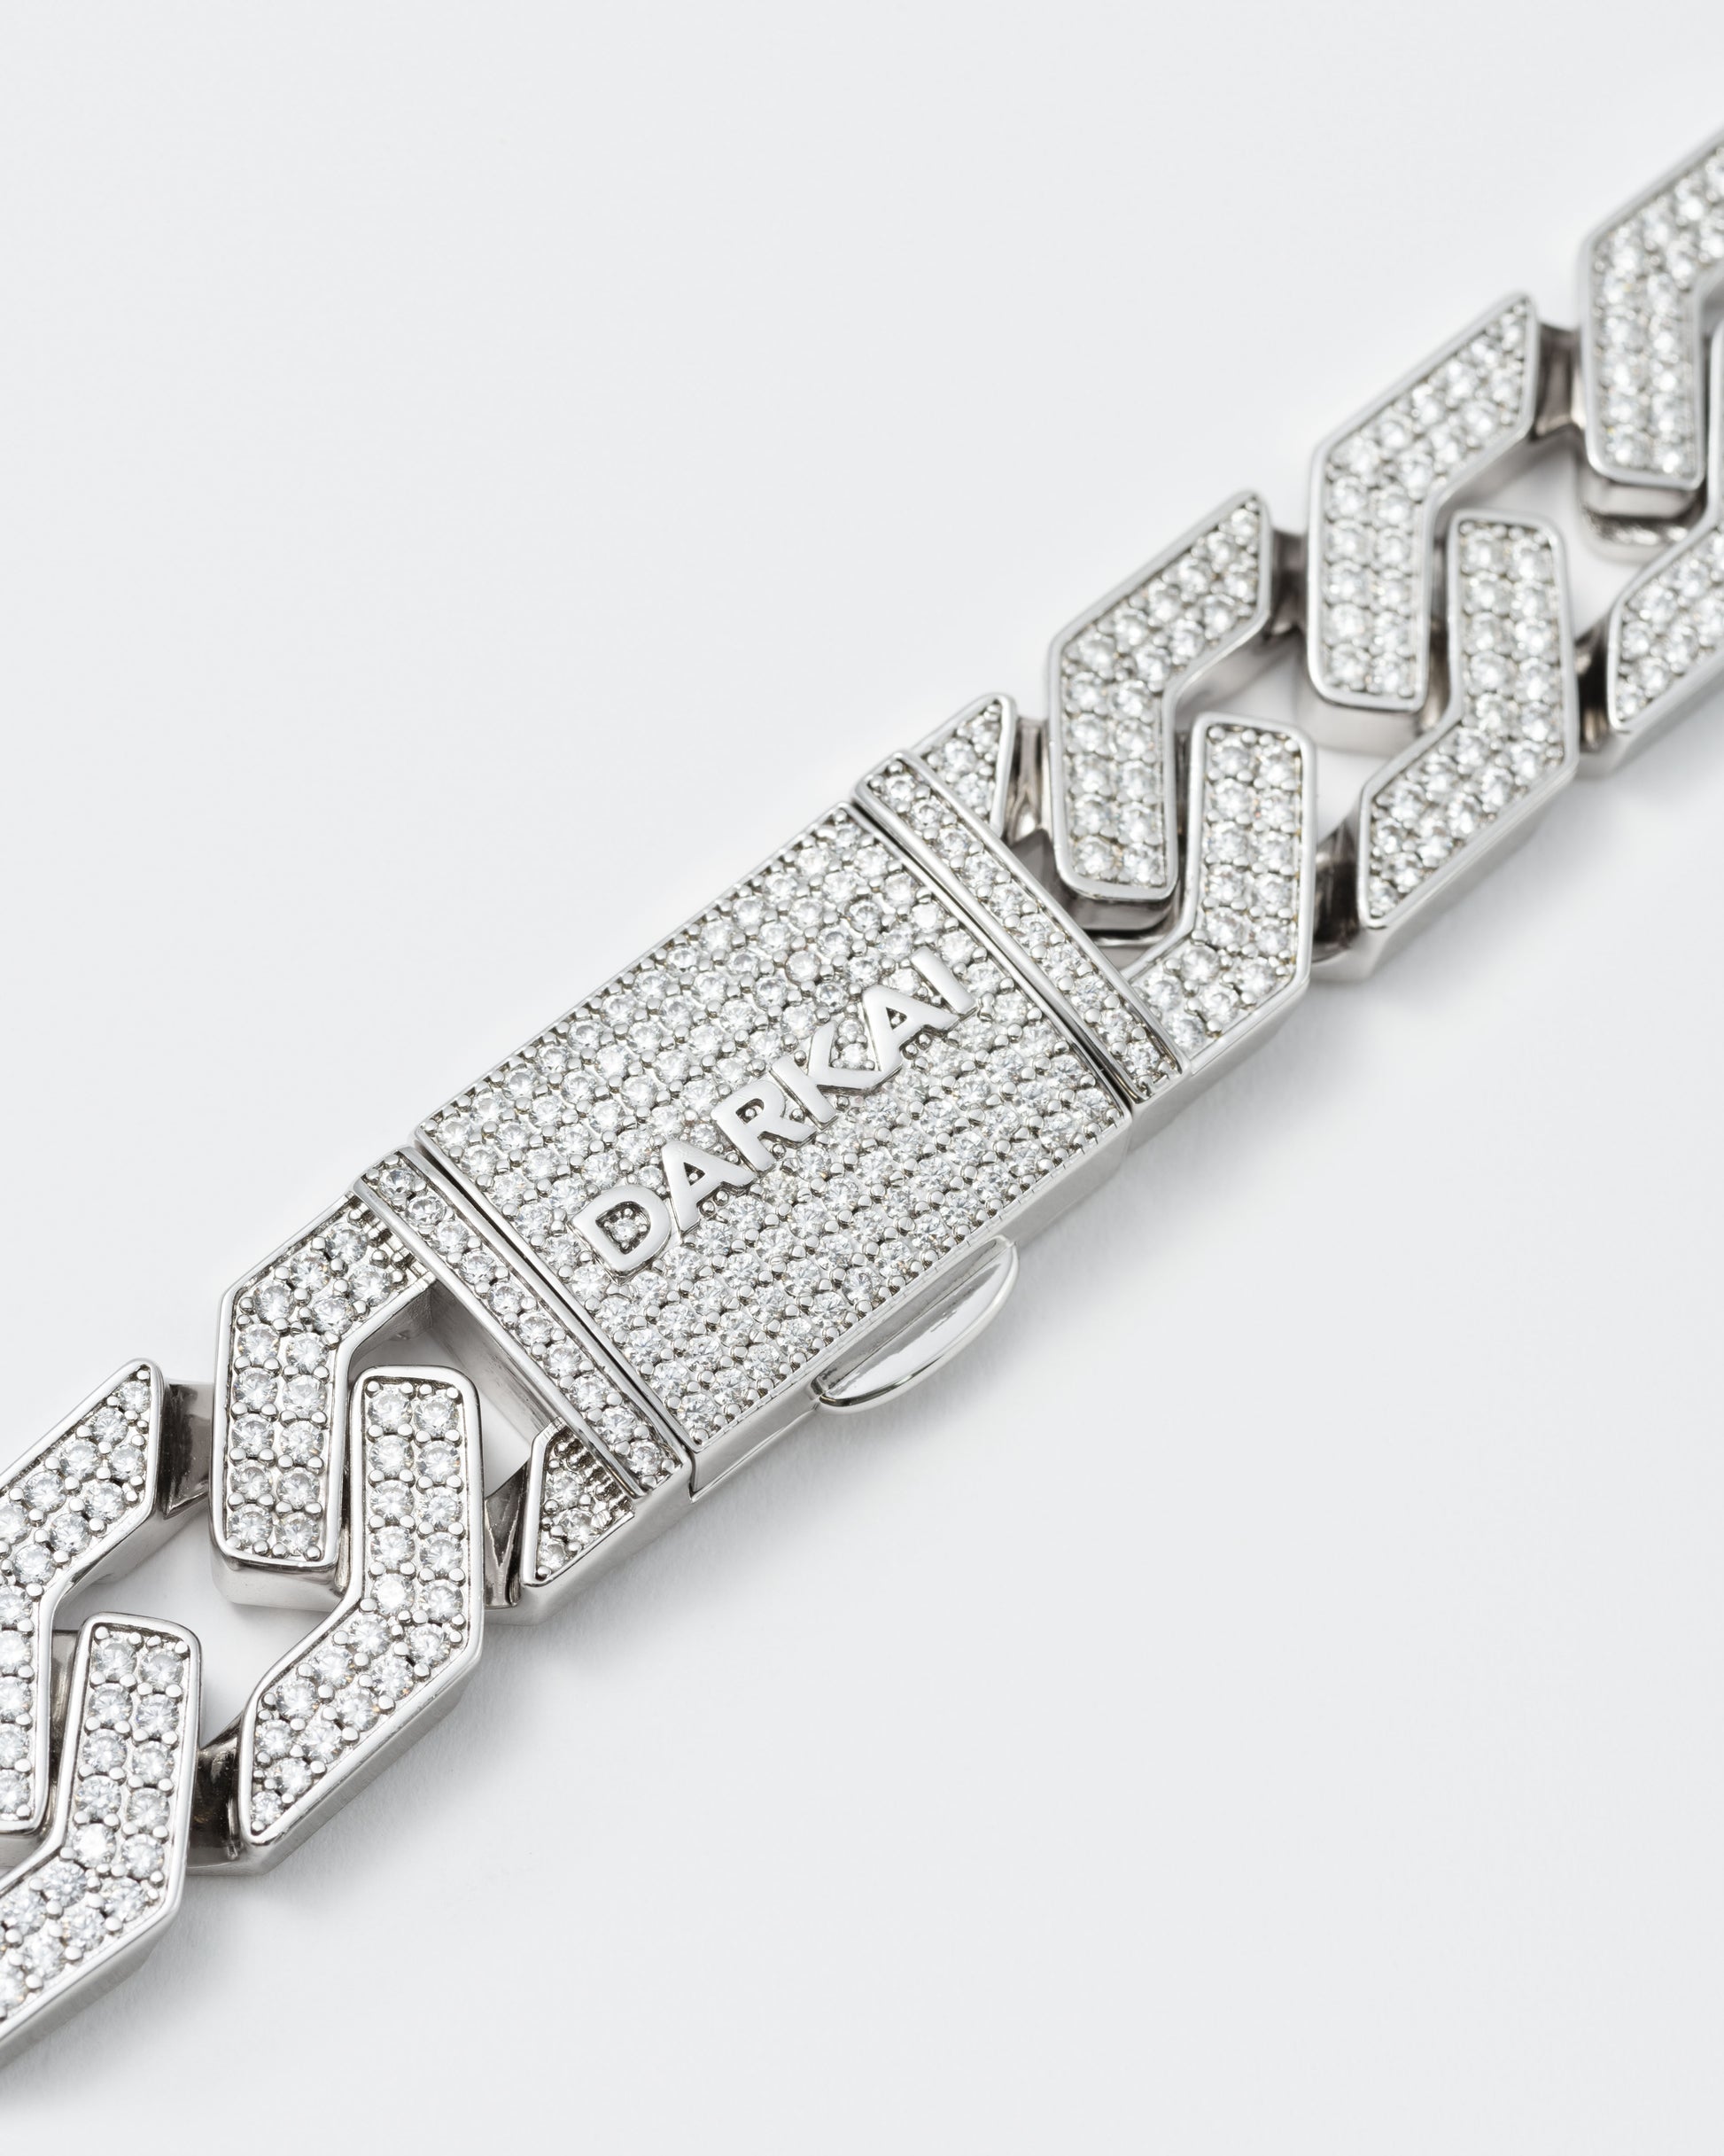 detail of oversize prong chain bracelet with 18kt white gold coating and hand-set micropavé stones in diamond white. Fine jewelry grade drawer closure with logo